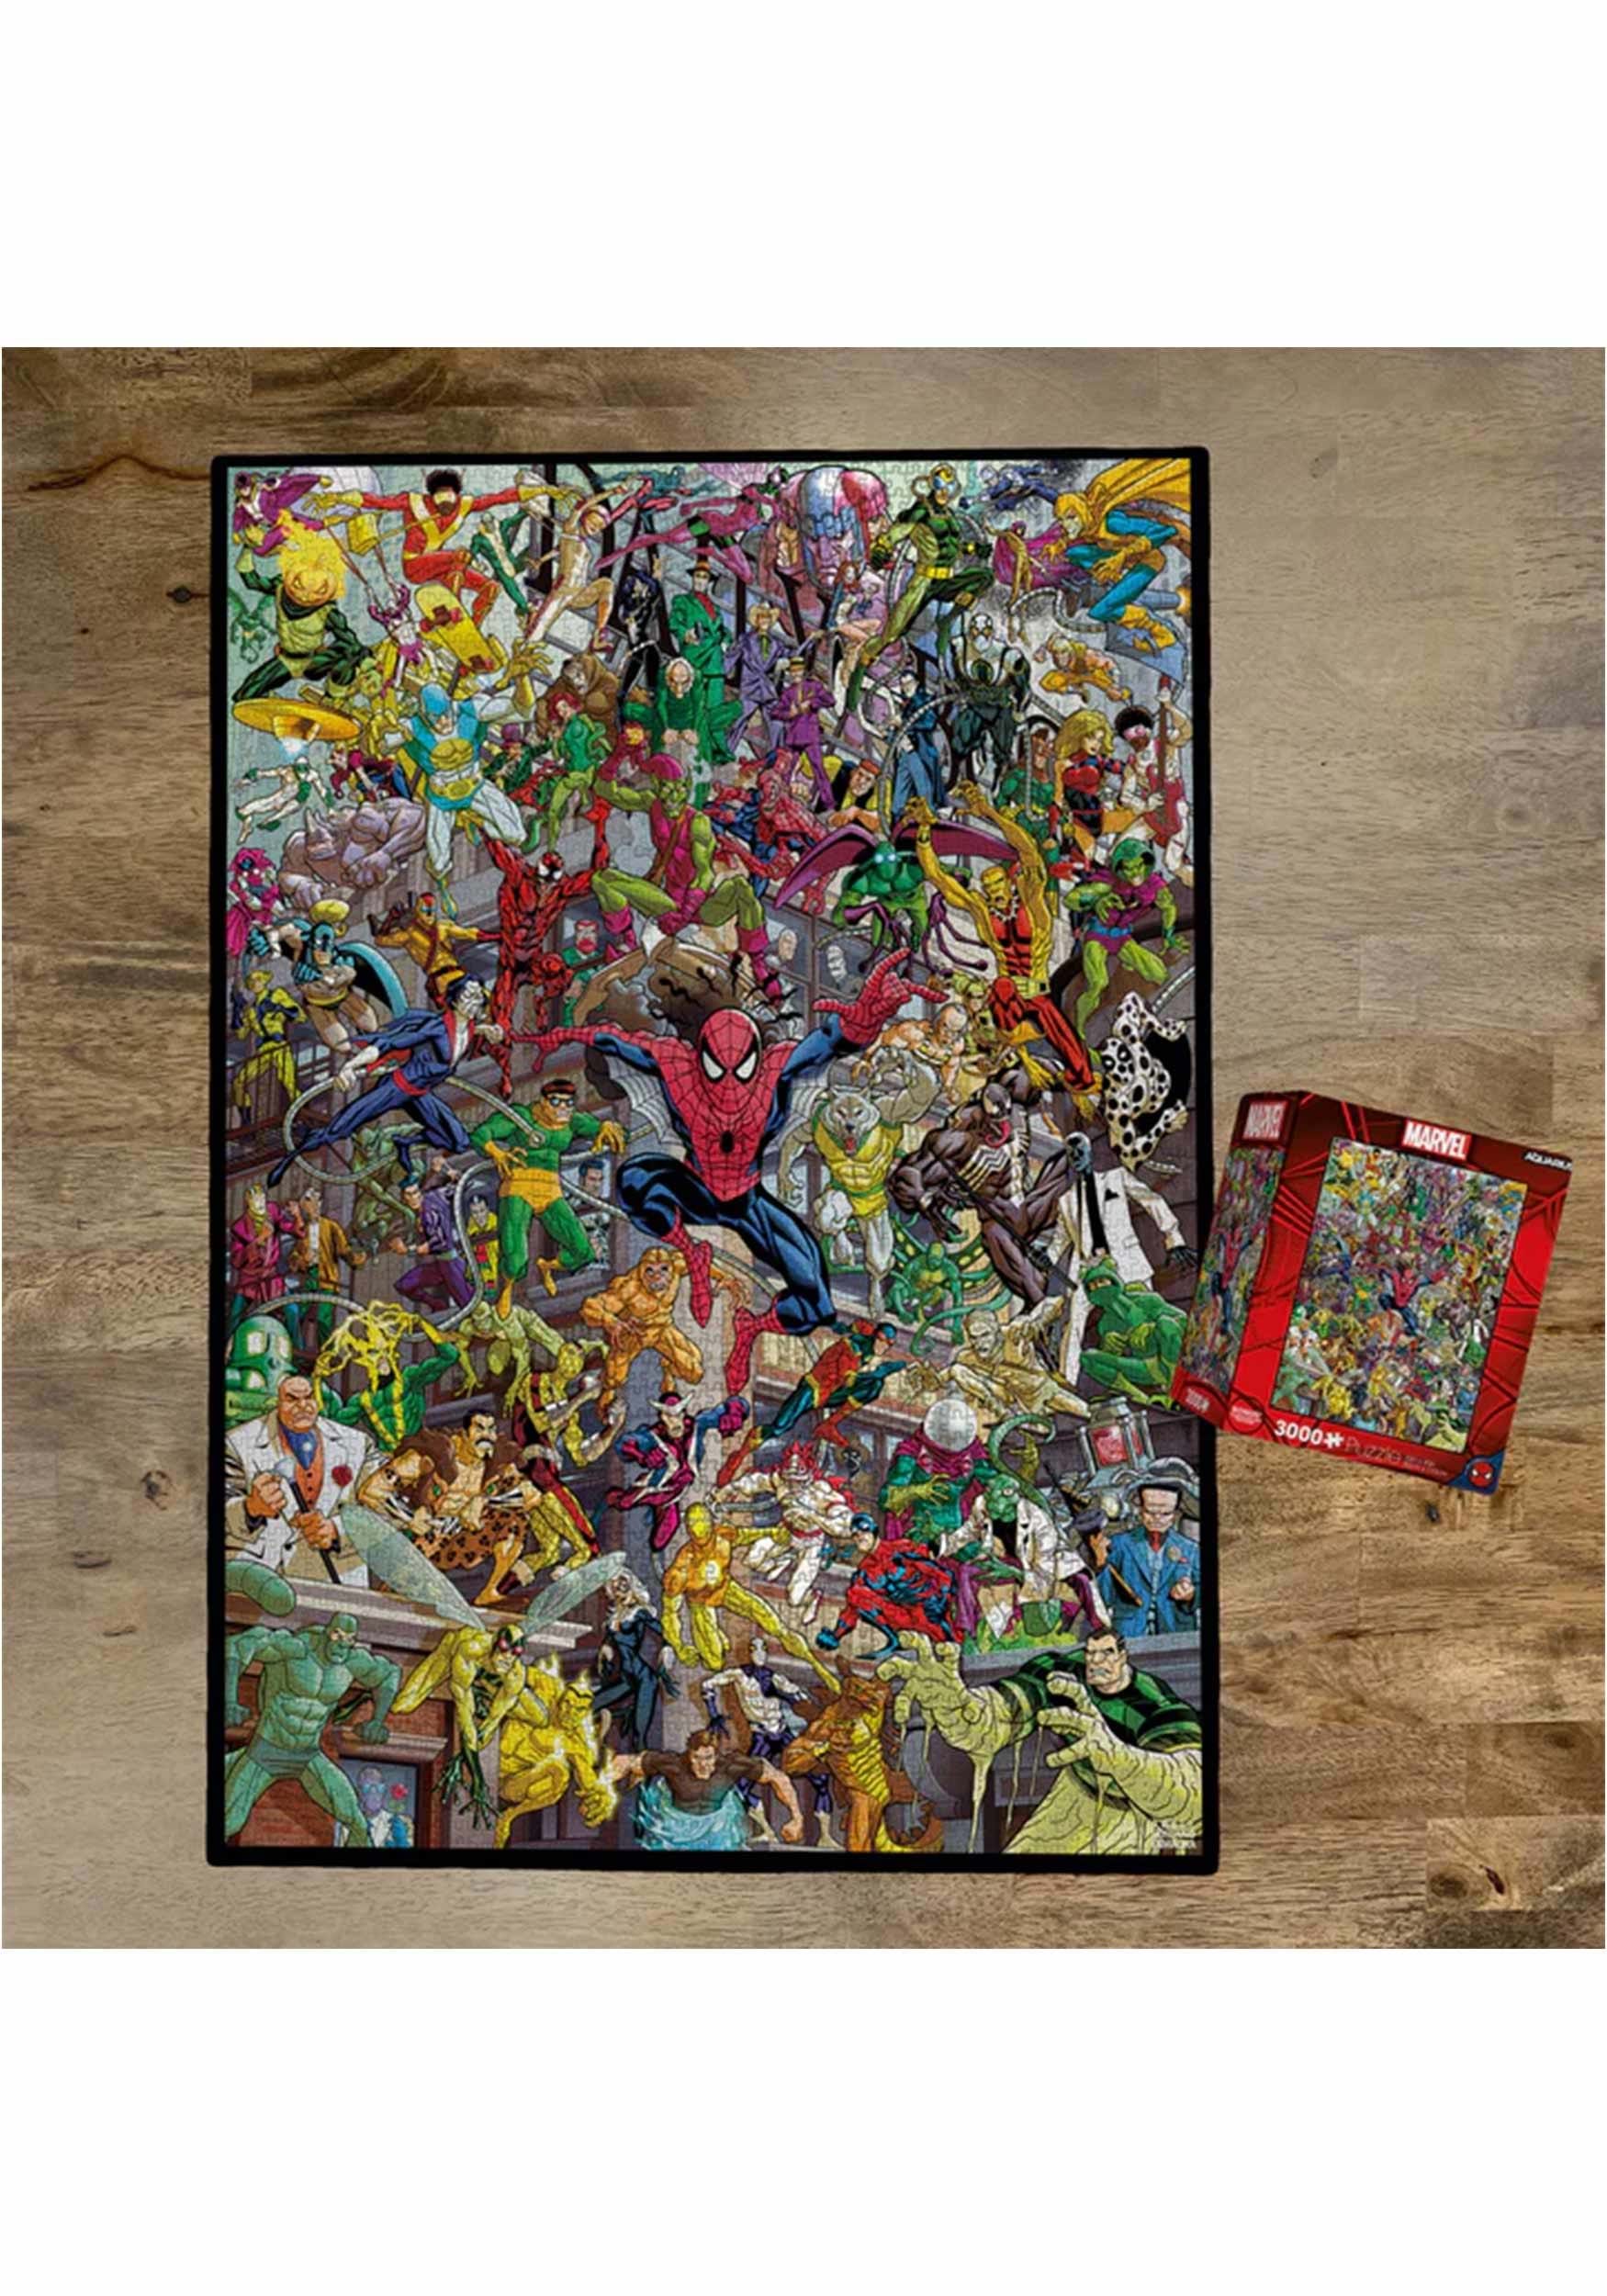 AQUARIUS Marvel Avengers 3000 Pieces Jigsaw Puzzle! 32in X 45” Of  Superheroes!!